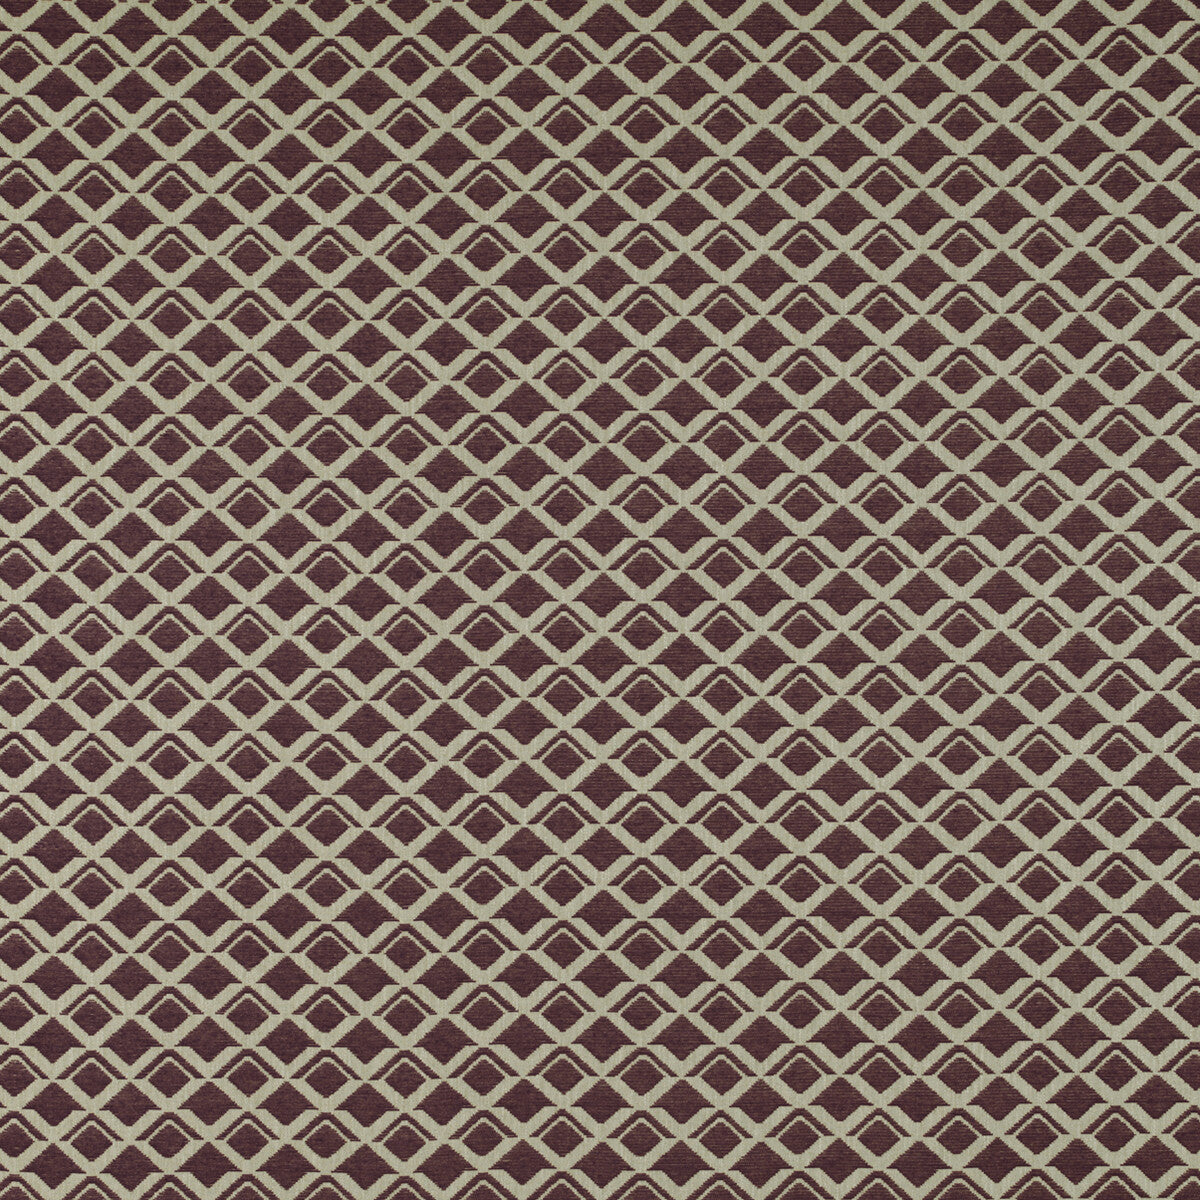 Lodi fabric in burdeos color - pattern GDT5324.005.0 - by Gaston y Daniela in the Tierras collection